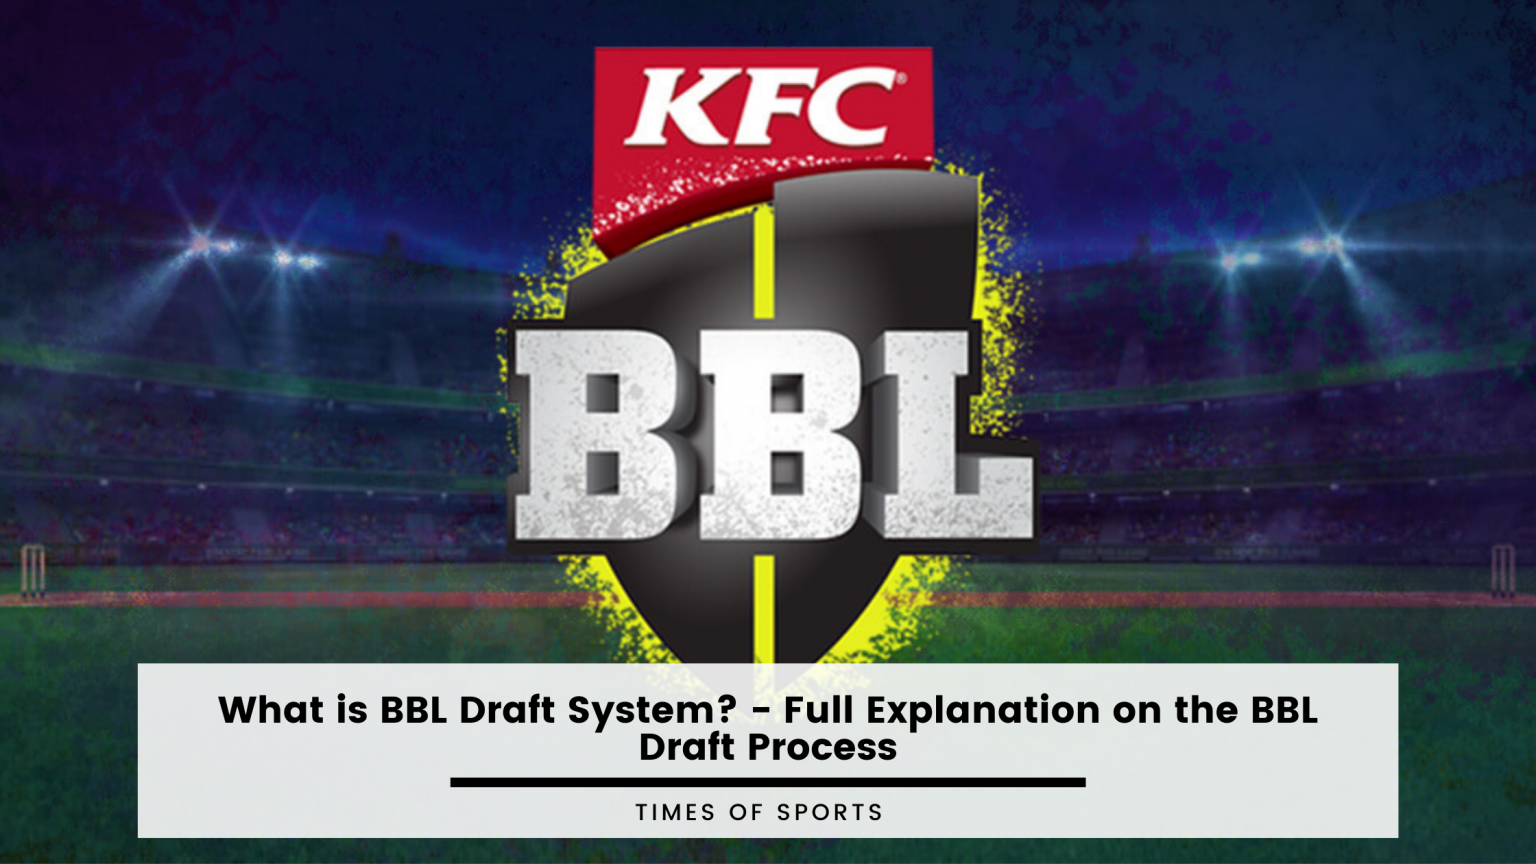 What is BBL Draft System? Full Explanation on the BBL Draft Process